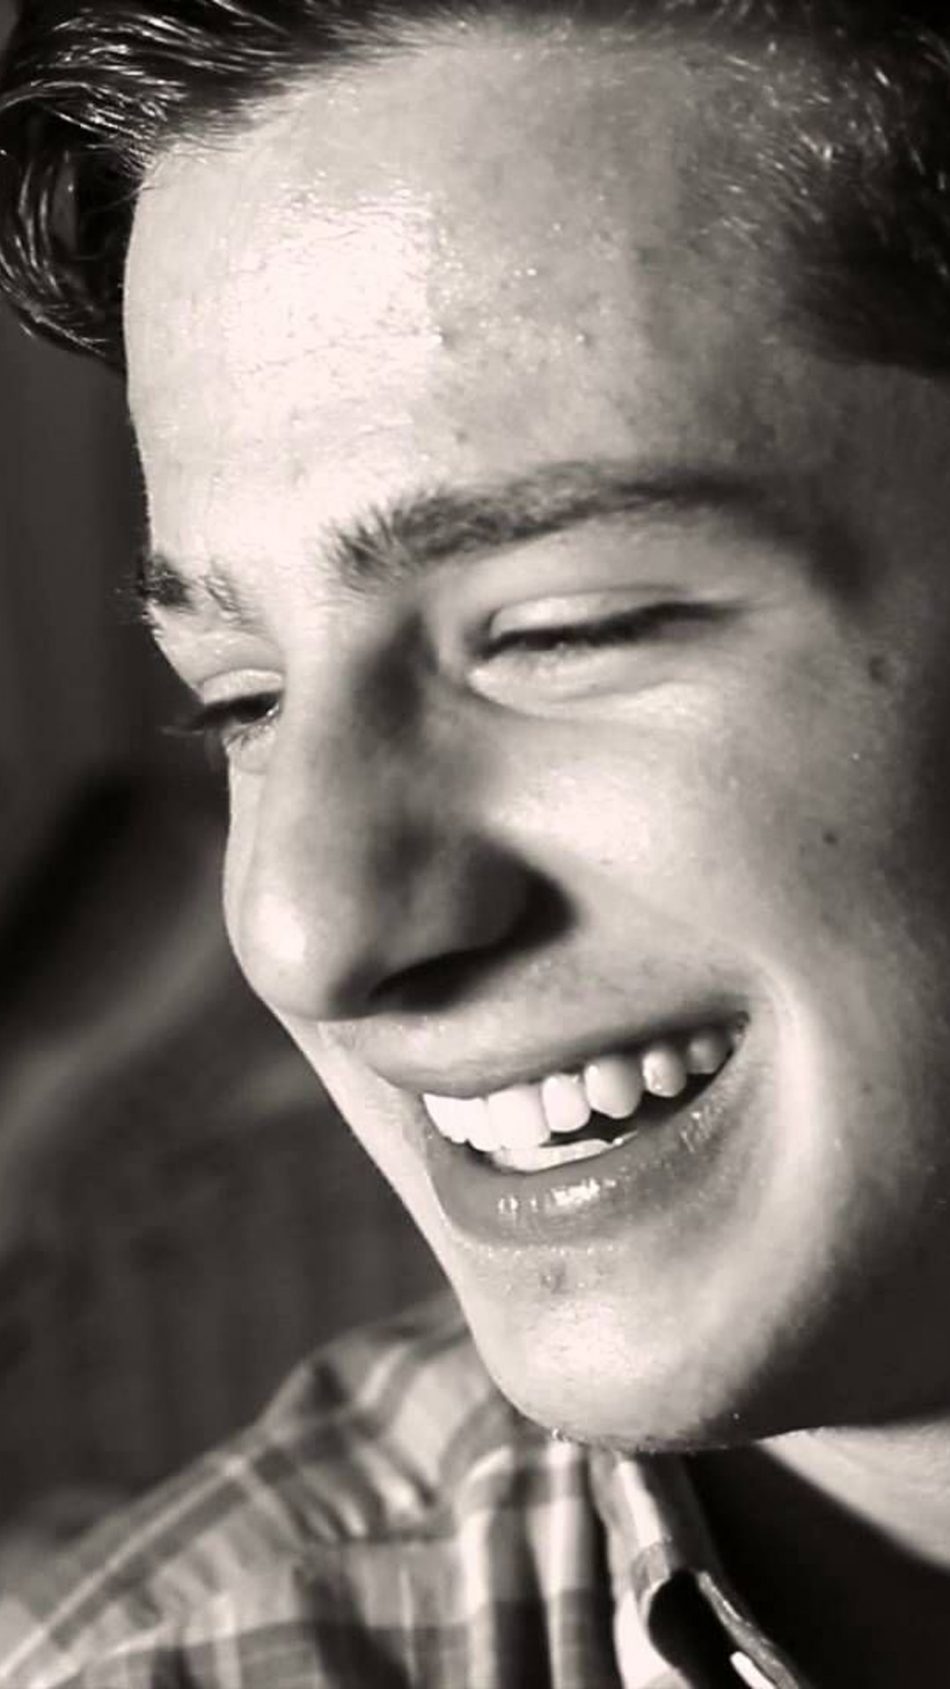 Charlie Puth Smile Hd Mobile Wallpaper - Charlie Puth Images Hd - HD Wallpaper 